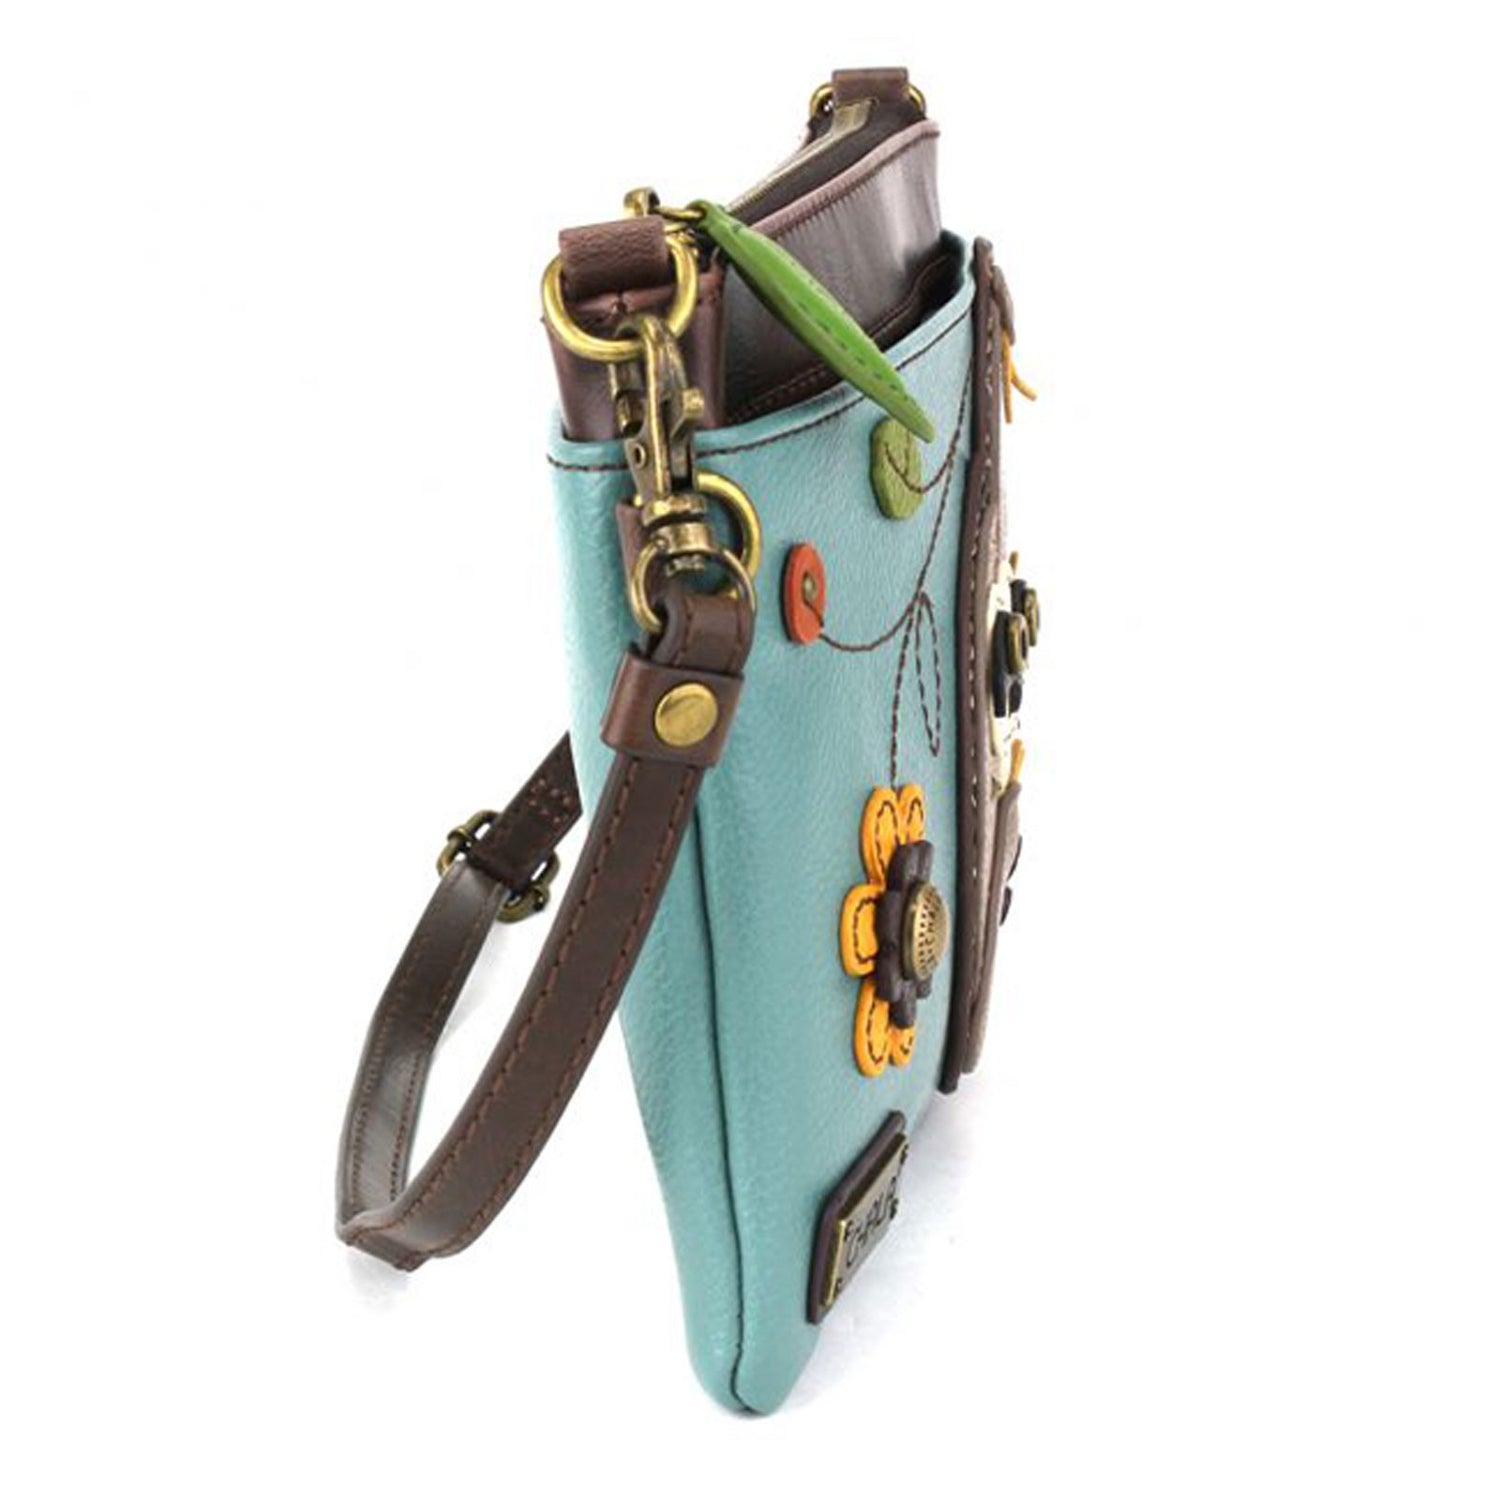 Chala Cell Phone Crossbody Dragonfly Turquoise